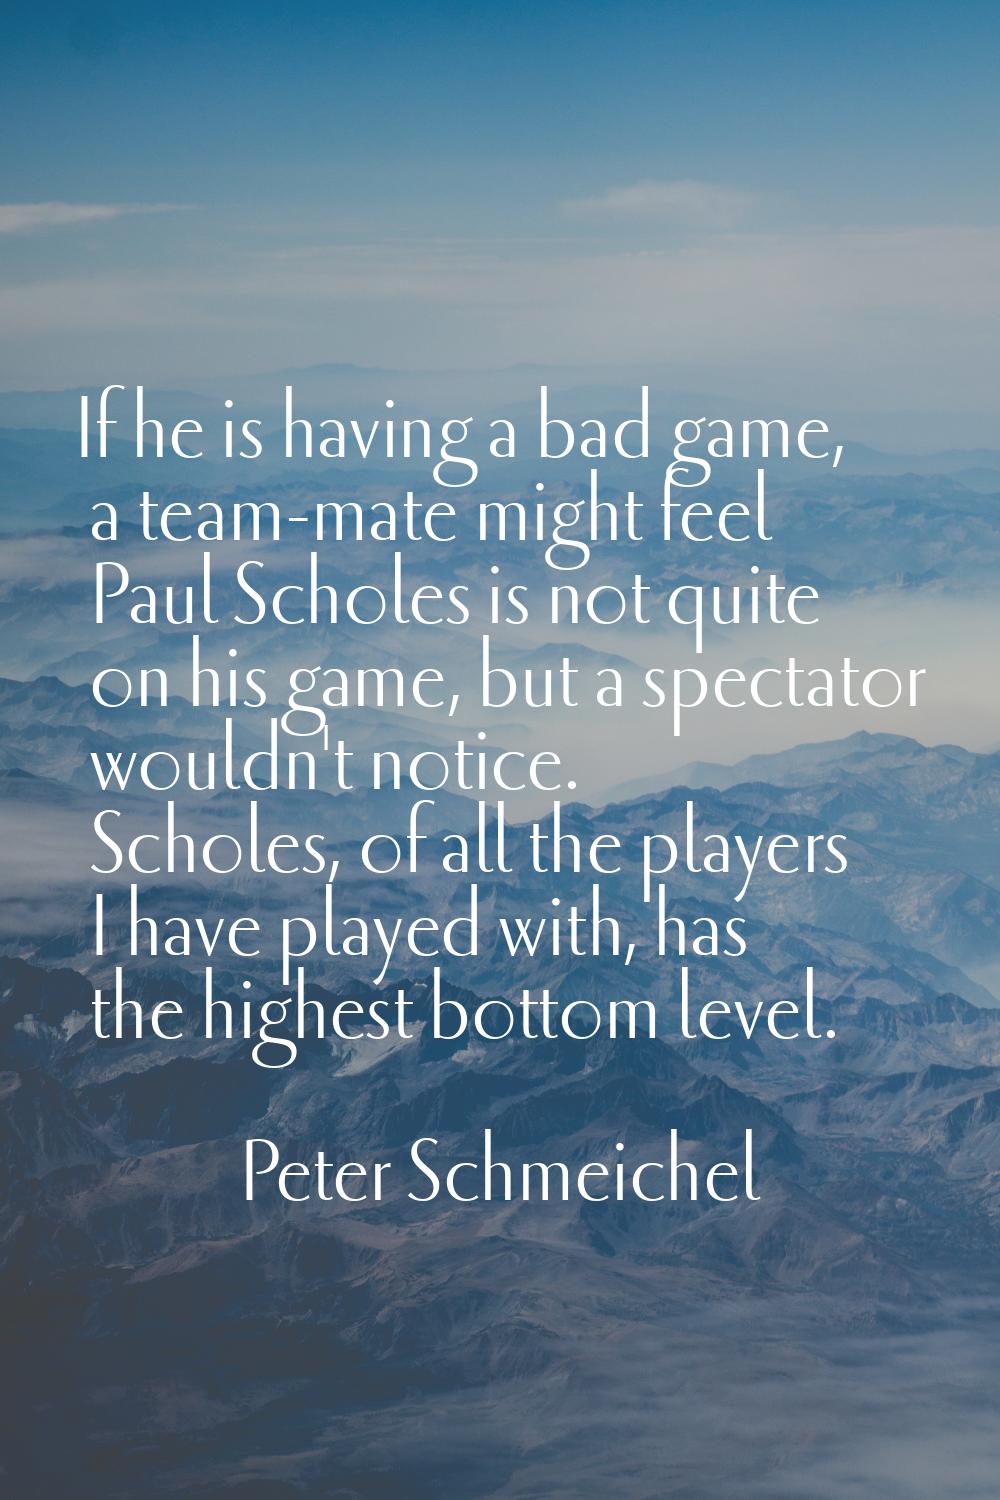 If he is having a bad game, a team-mate might feel Paul Scholes is not quite on his game, but a spe